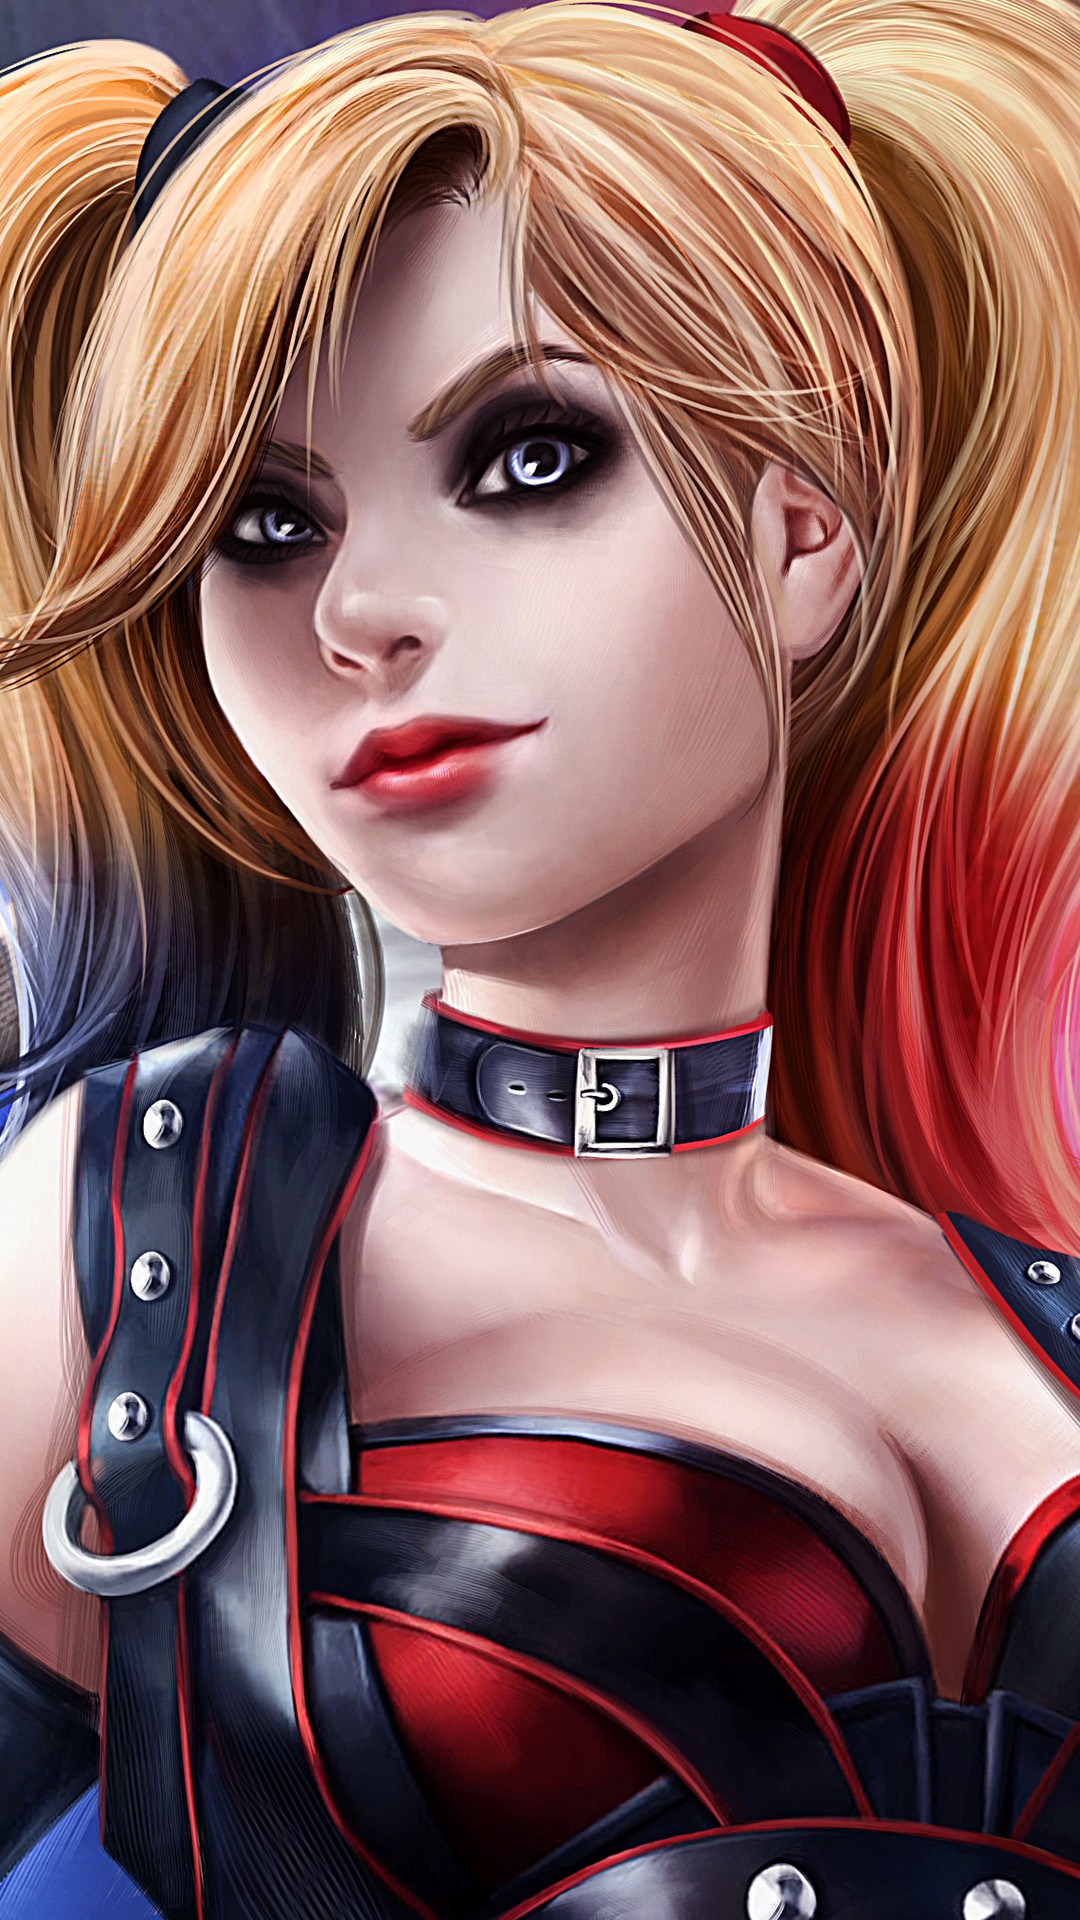 Android Wallpaper Harley Quinn With Image Resolution - Harley Quinn Wallpaper Anime - HD Wallpaper 